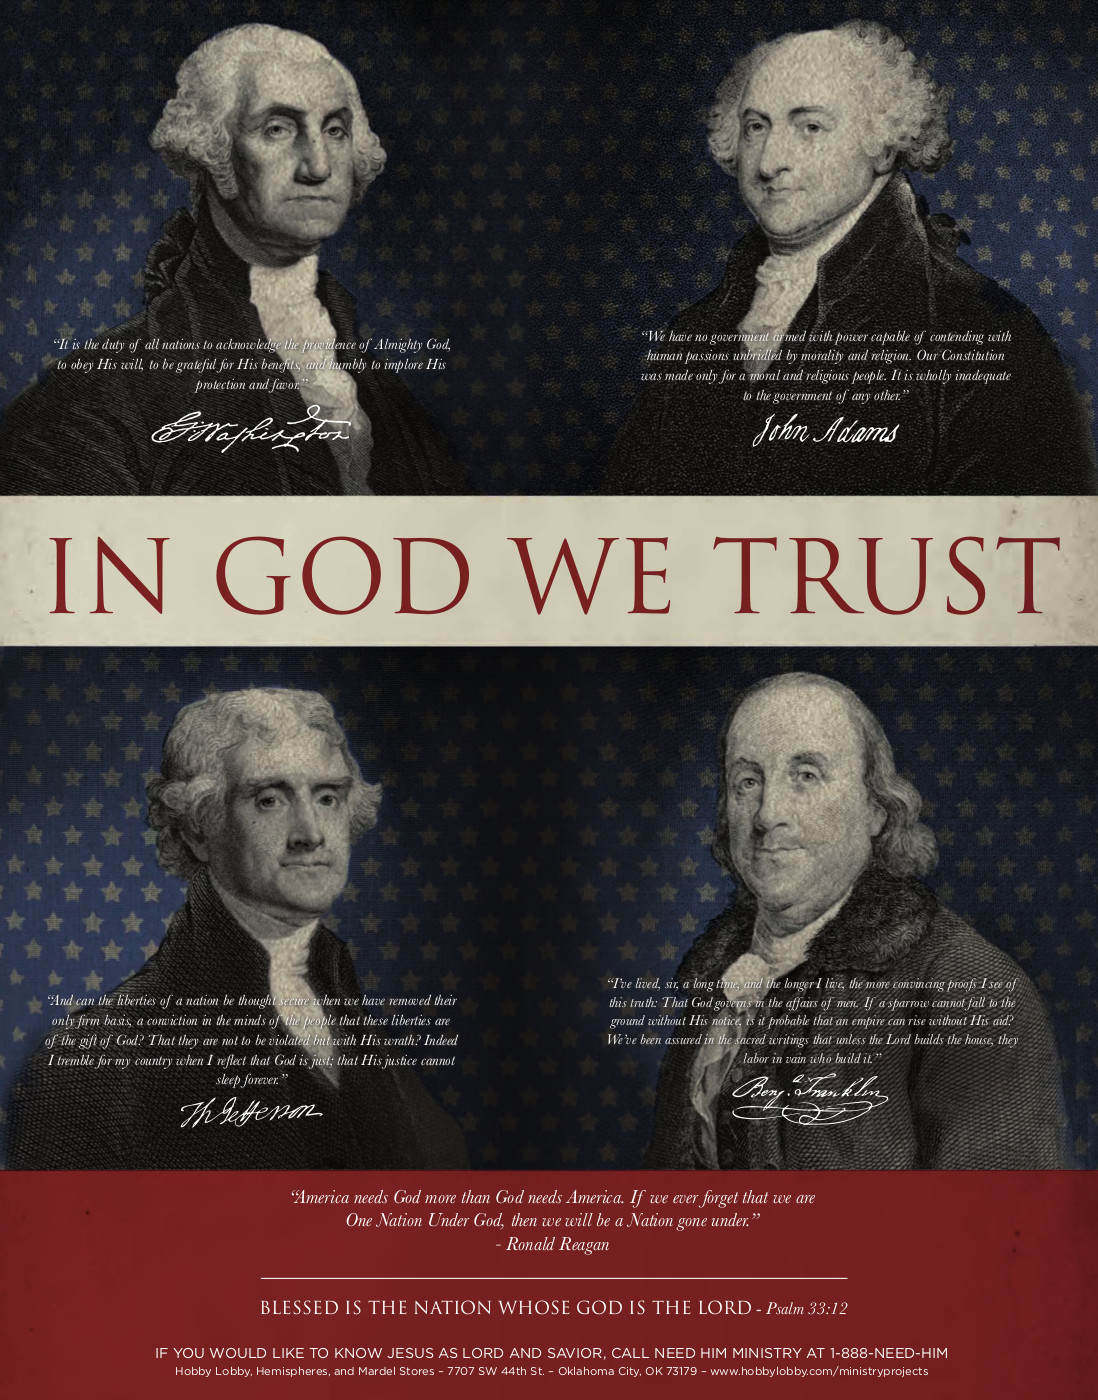 Founding Fathers On Religion Quotes. QuotesGram